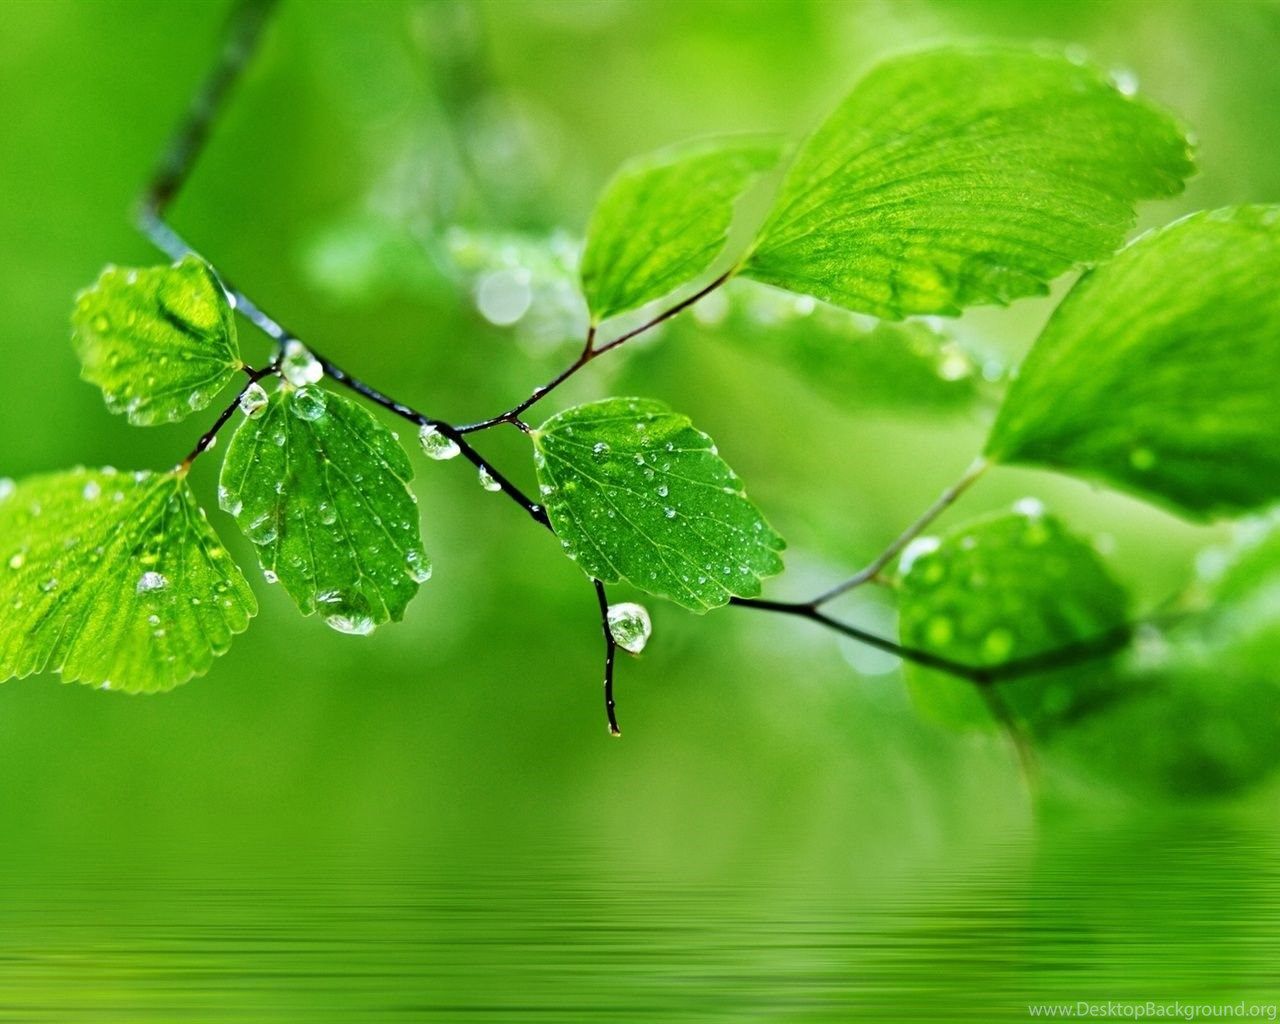 Green Theme Background, Drops Of Water On The Leaves Wallpaper. Desktop Background